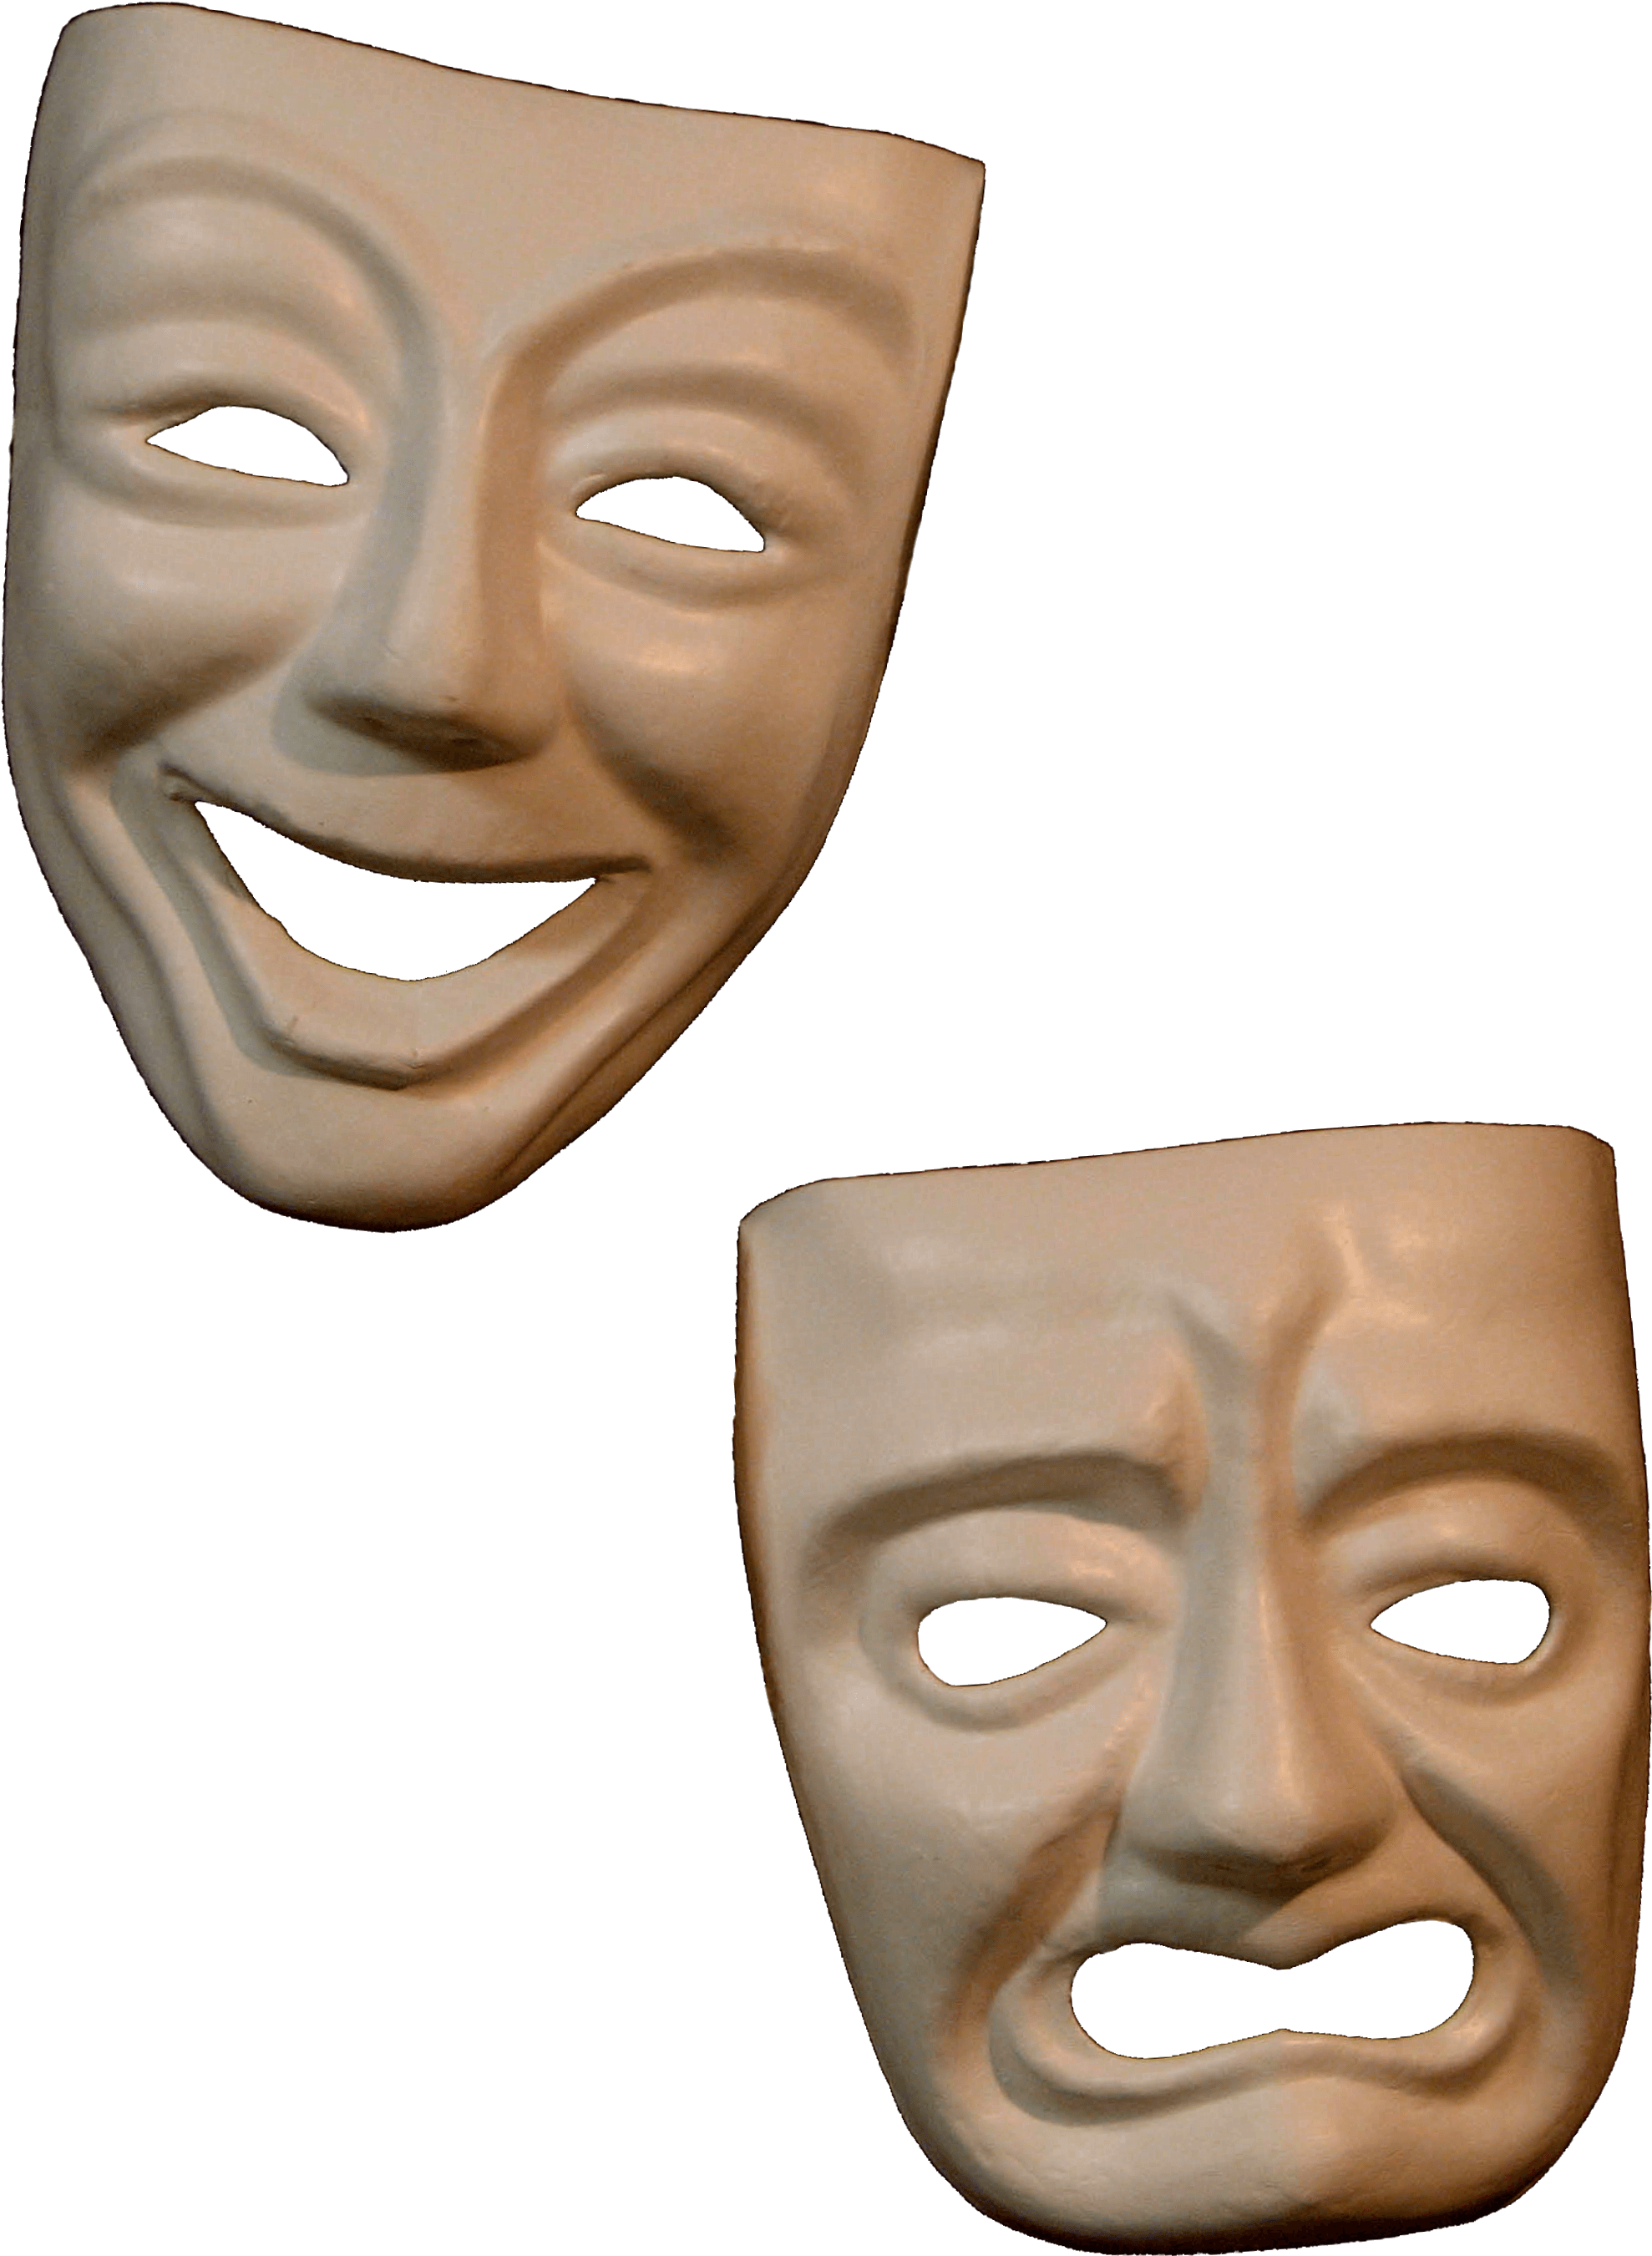 A Pair Of Masks With A Smile